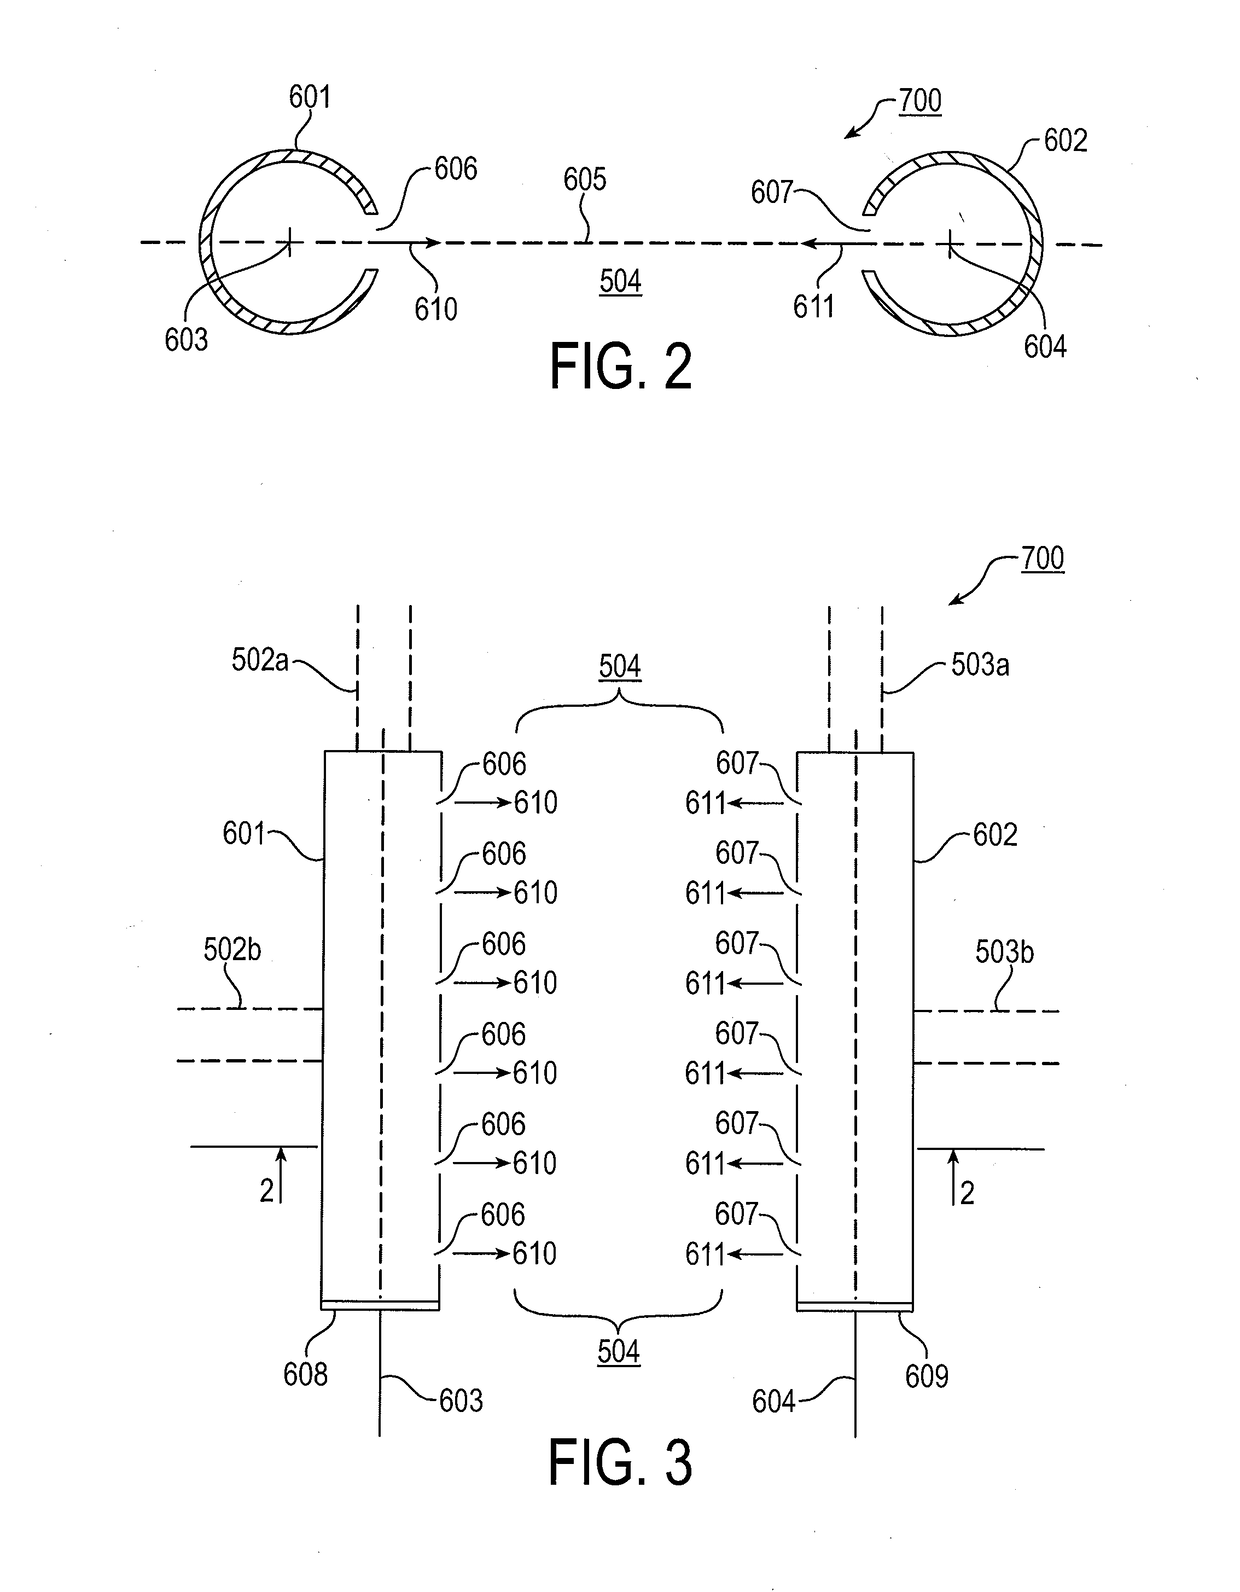 Method and apparatus for static mixing of multiple opposing influent streams